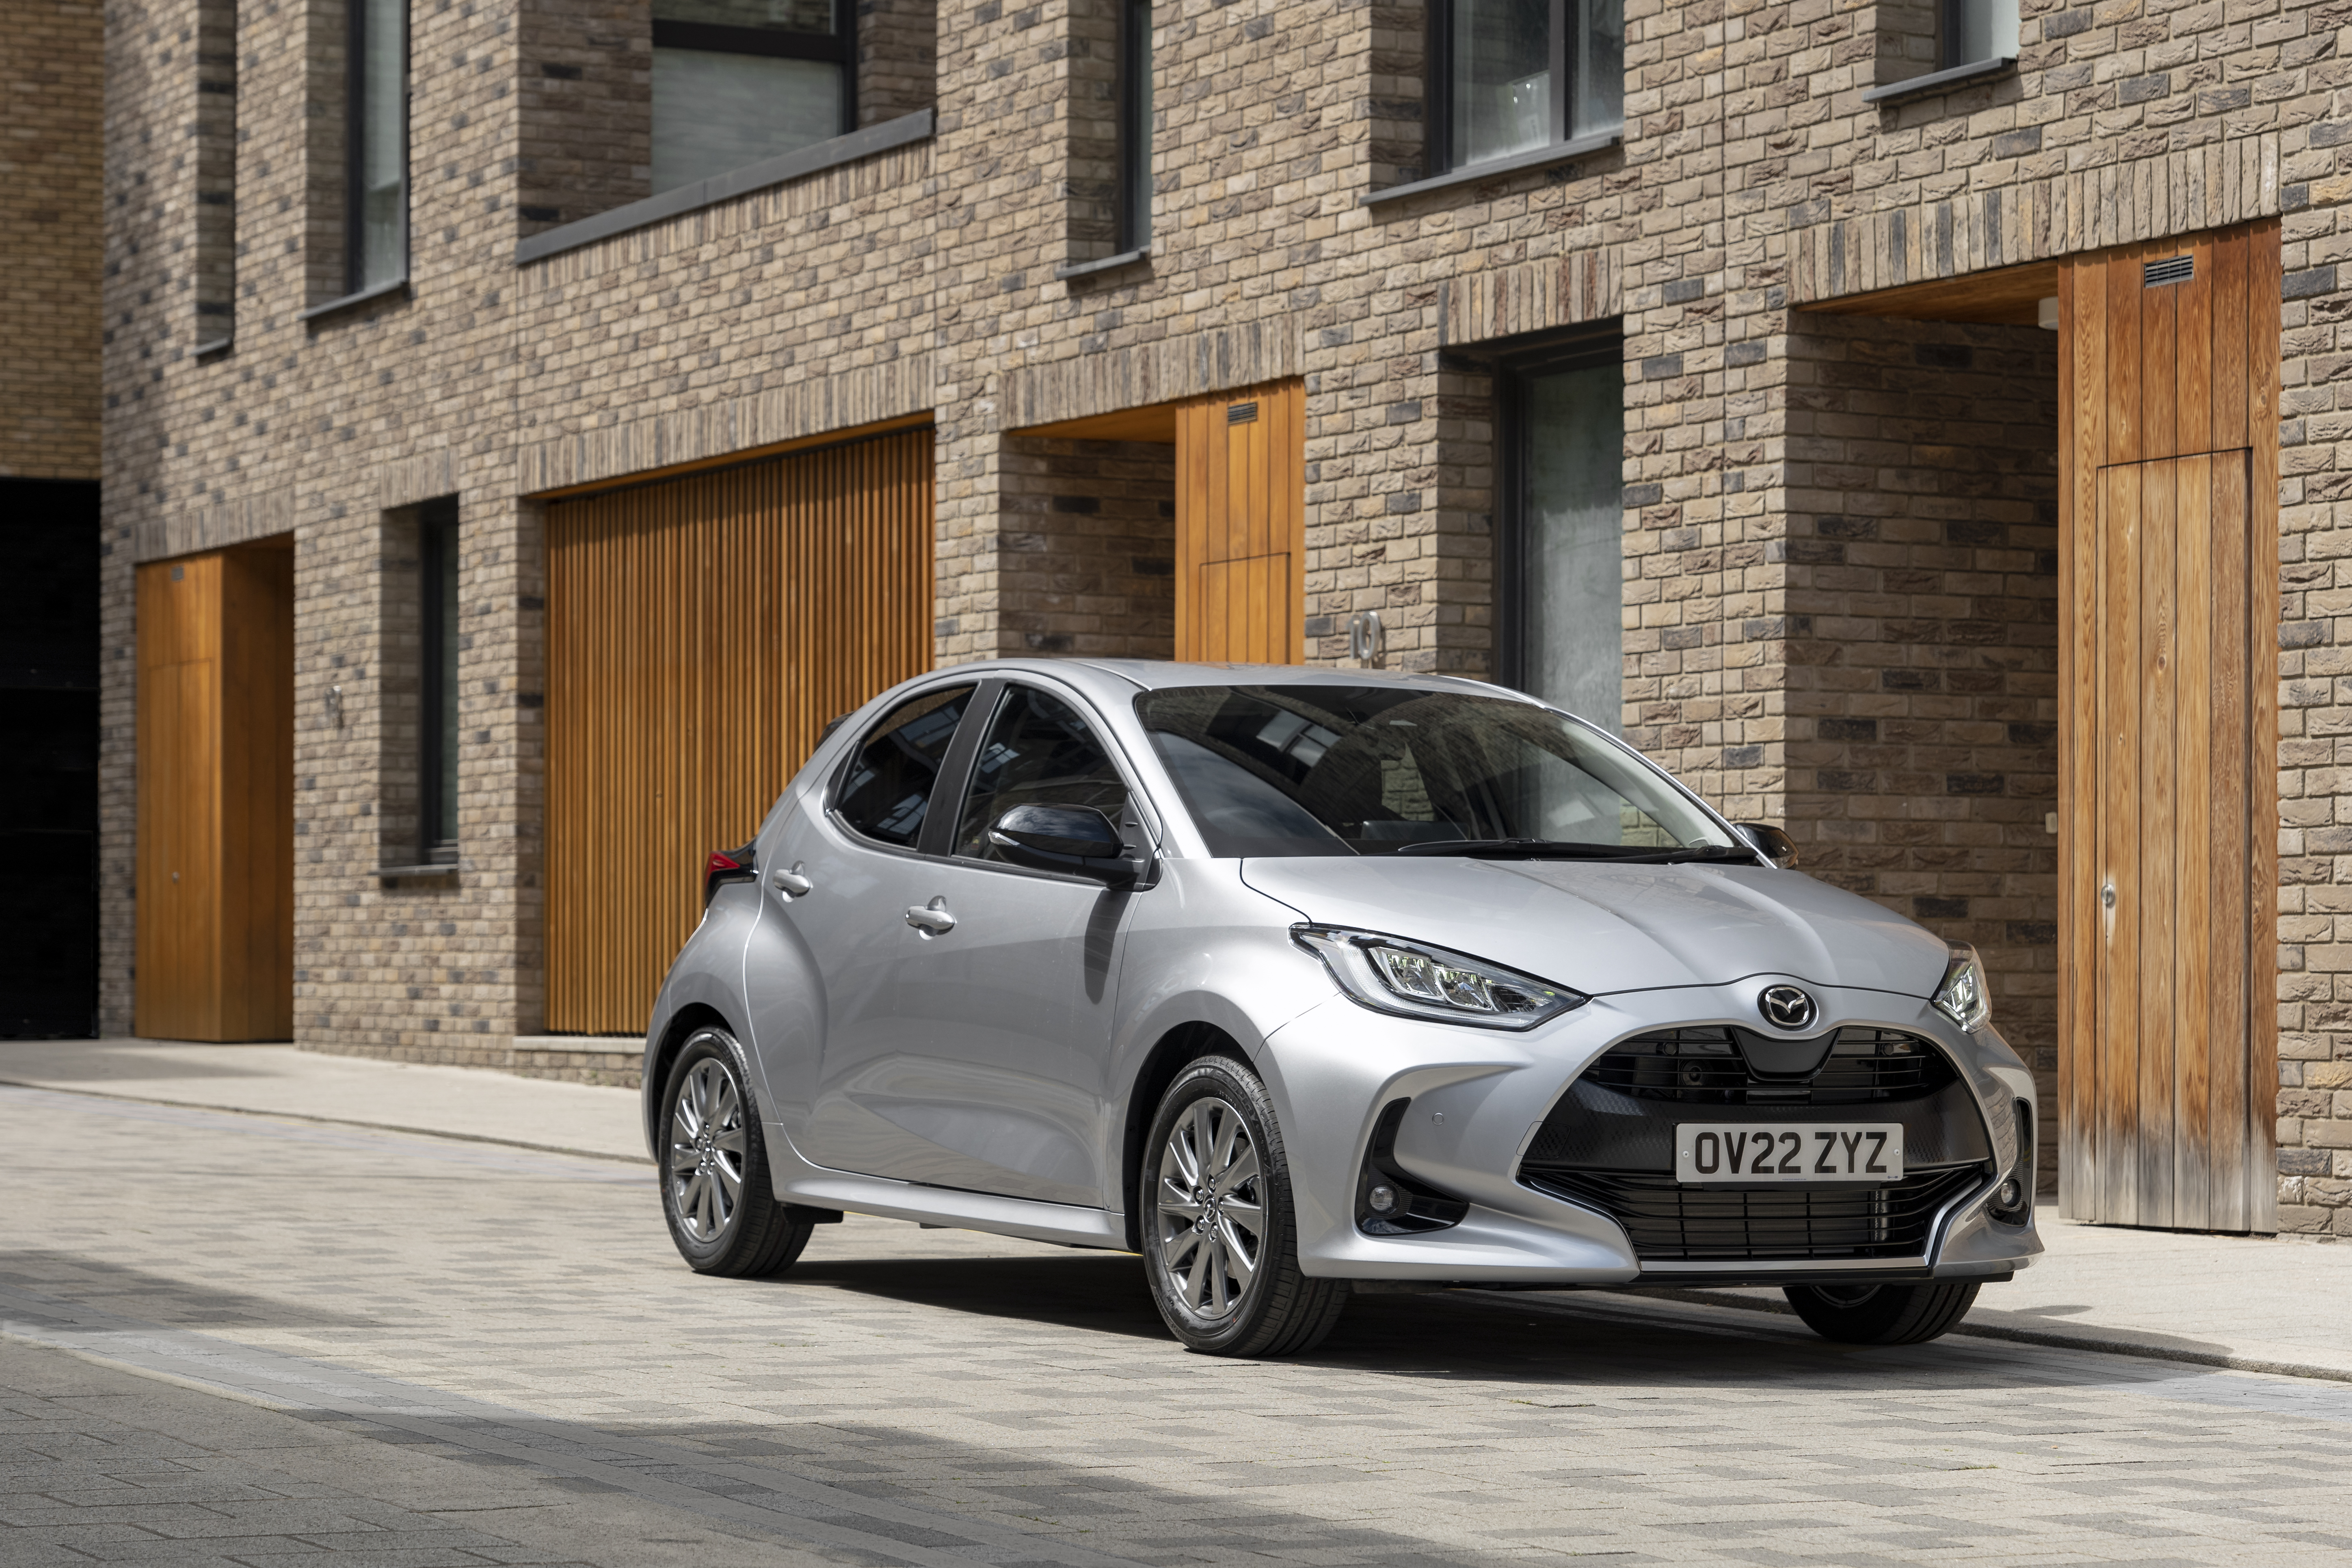 New 2022 Mazda 2 Hybrid goes on sale from £20,300